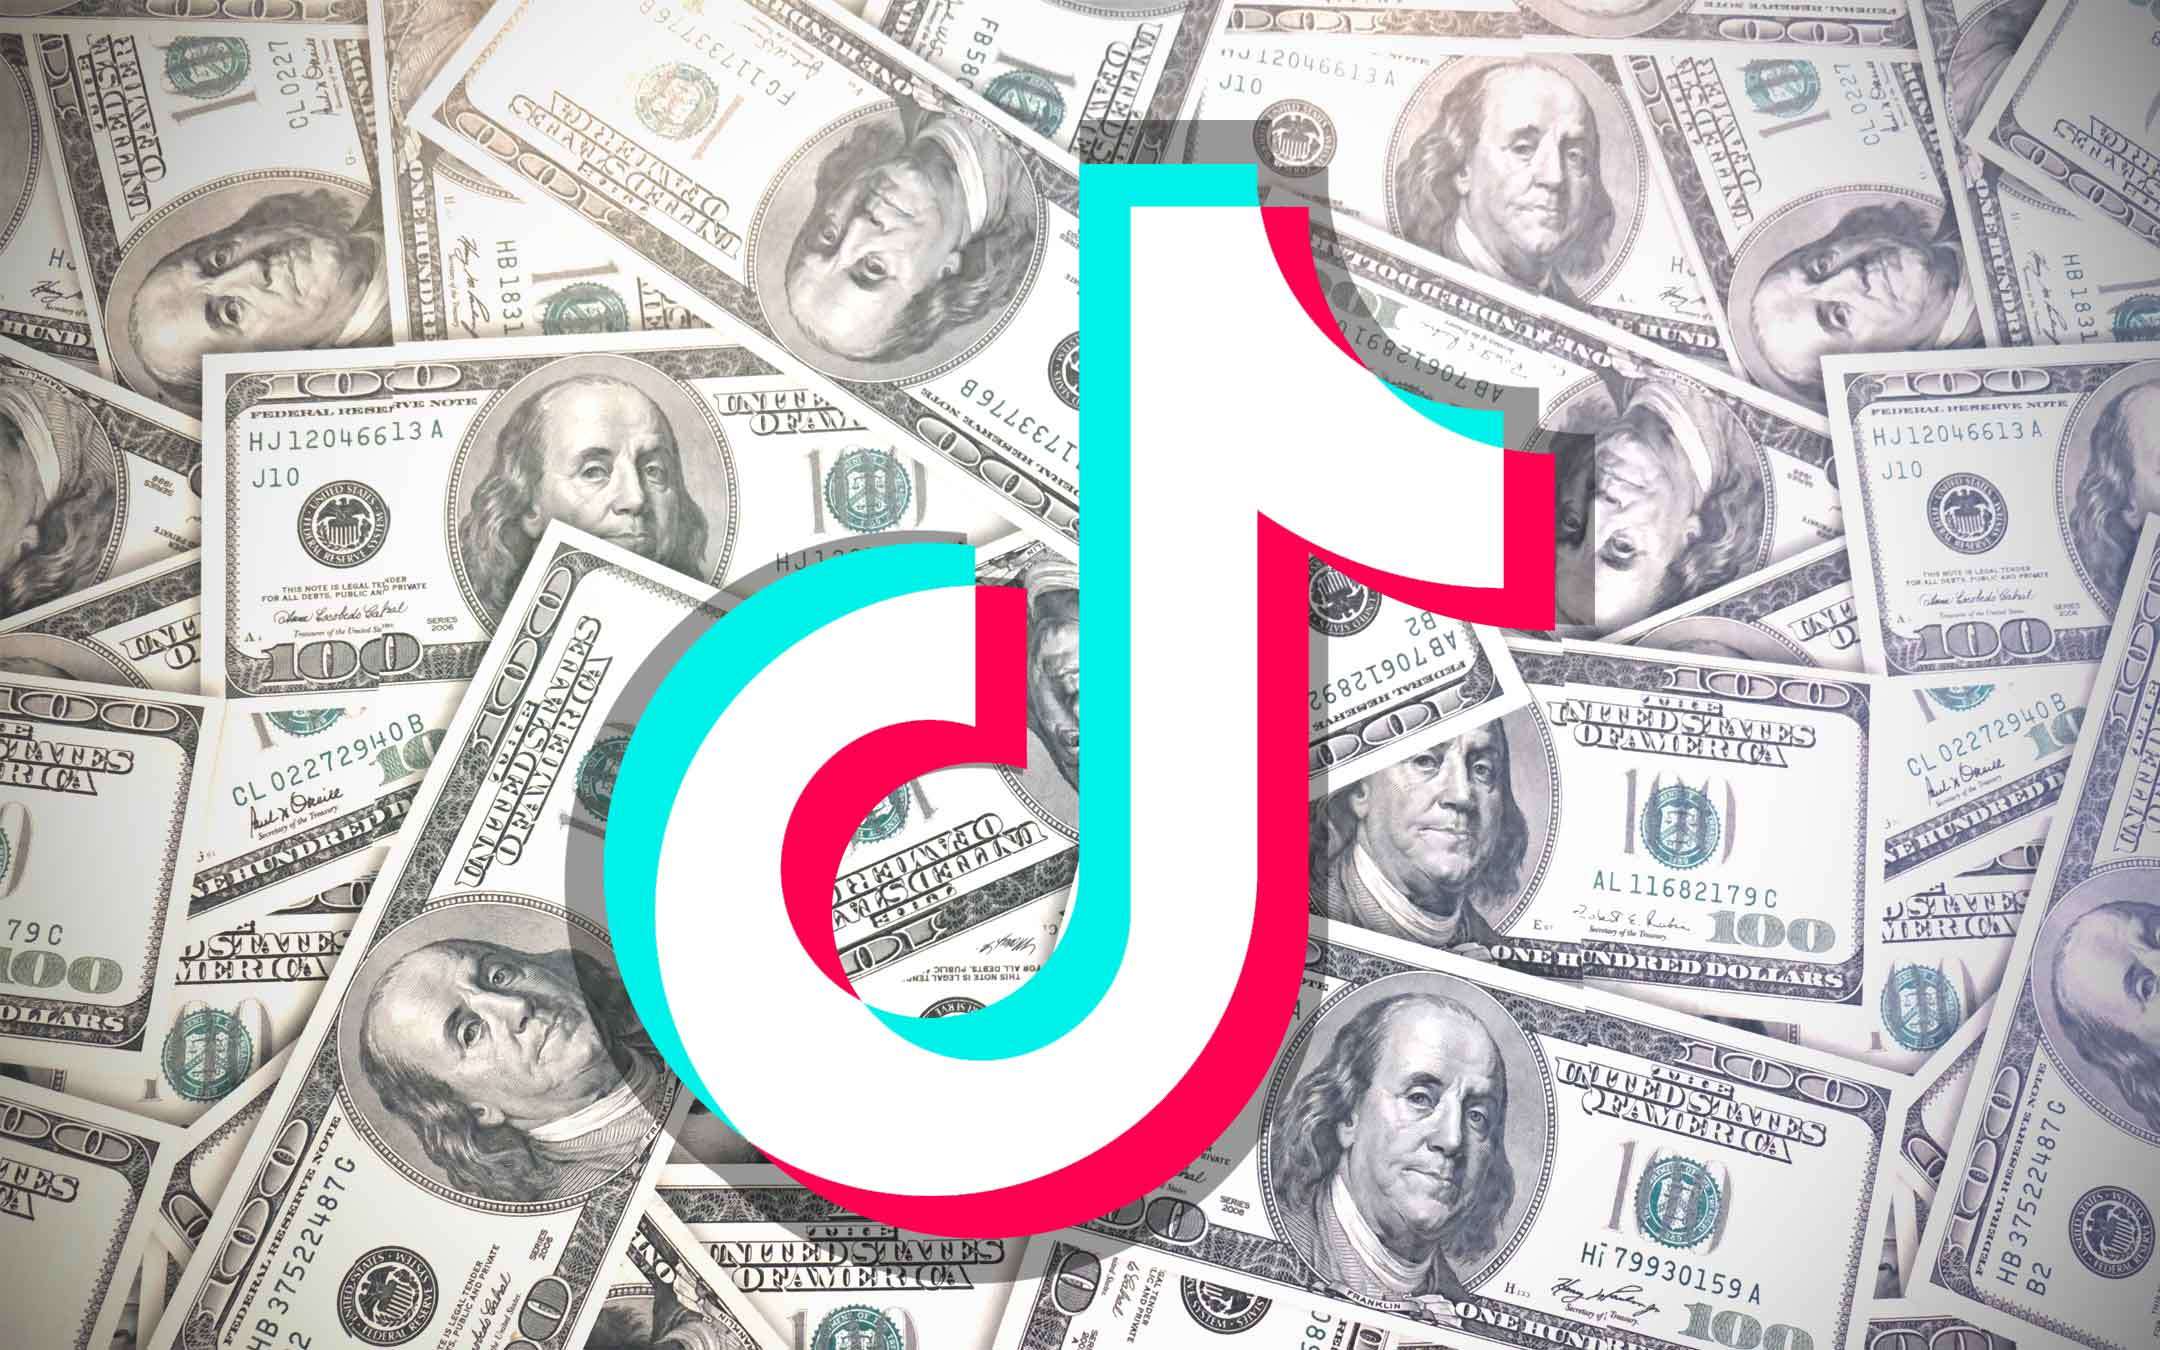 The acquisition of TikTok is getting closer and closer